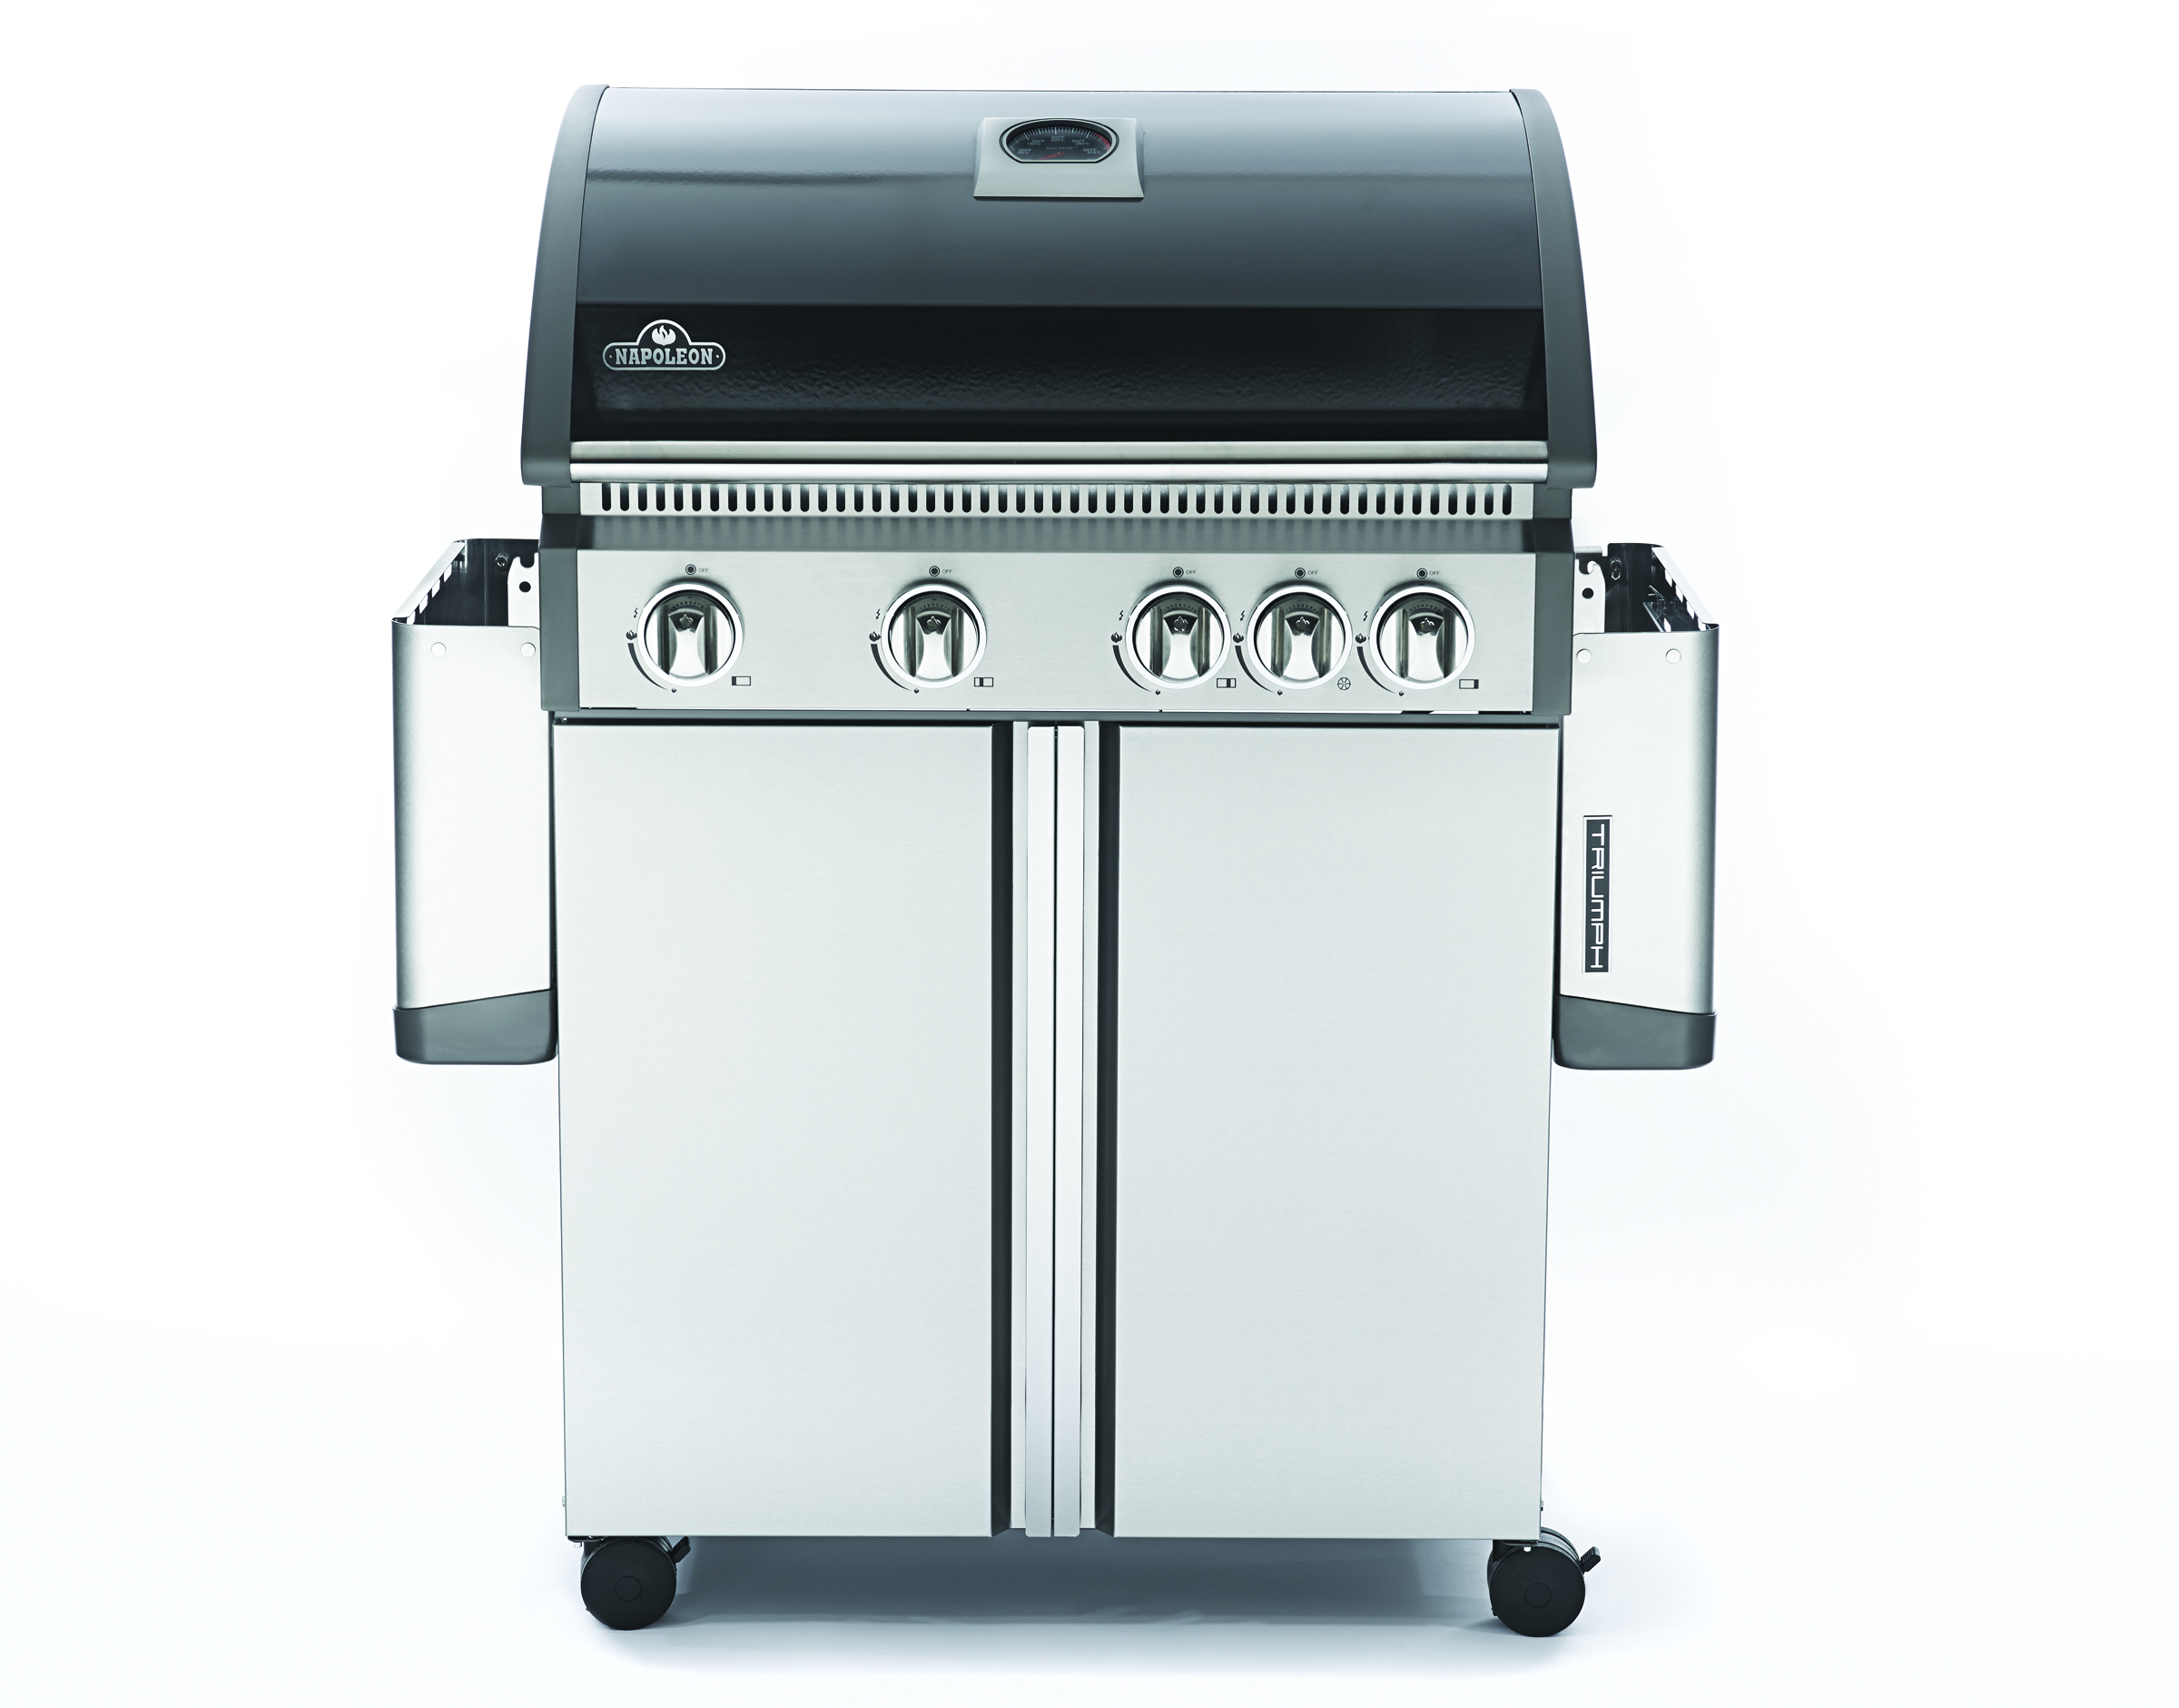 Napoleon Triumph® 495 LP Grill with Side Burner, Black with Cover Included - image 2 of 9